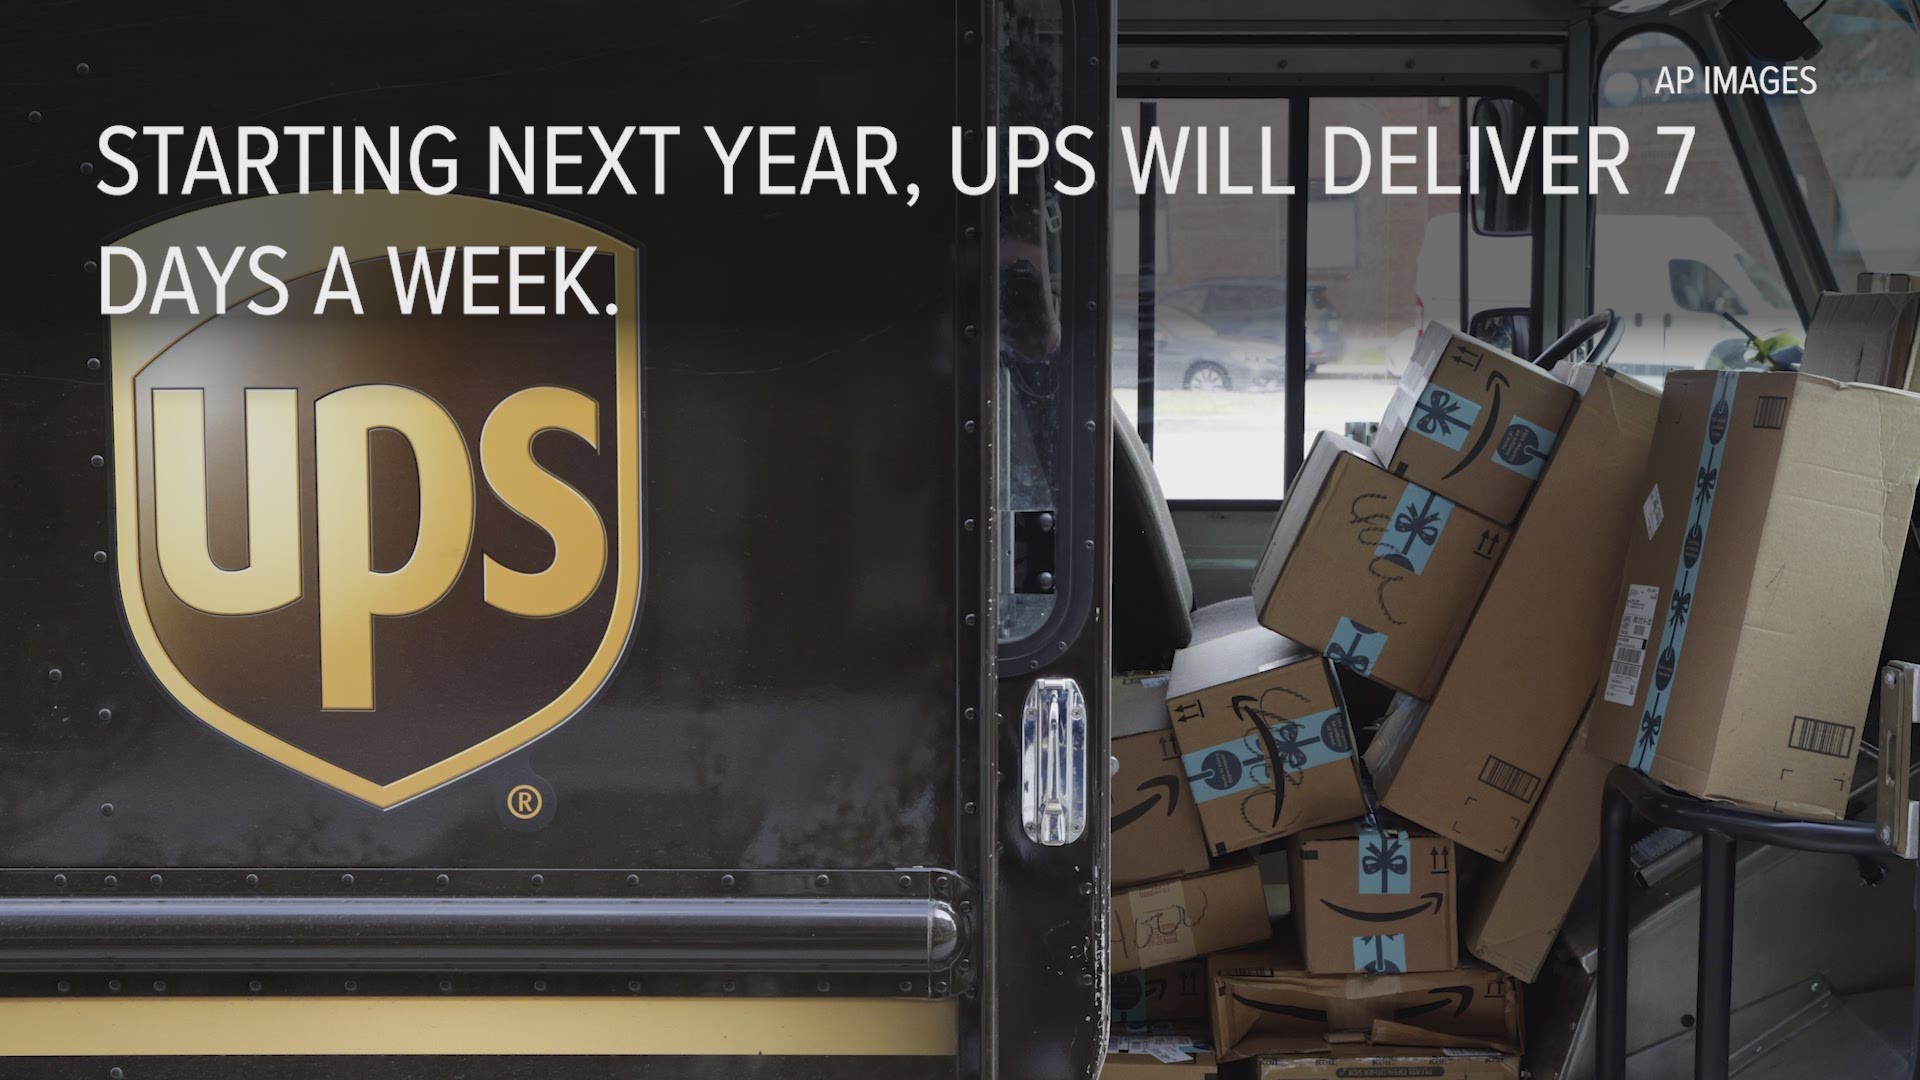 UPS is planning to start doing seven-day delivery.